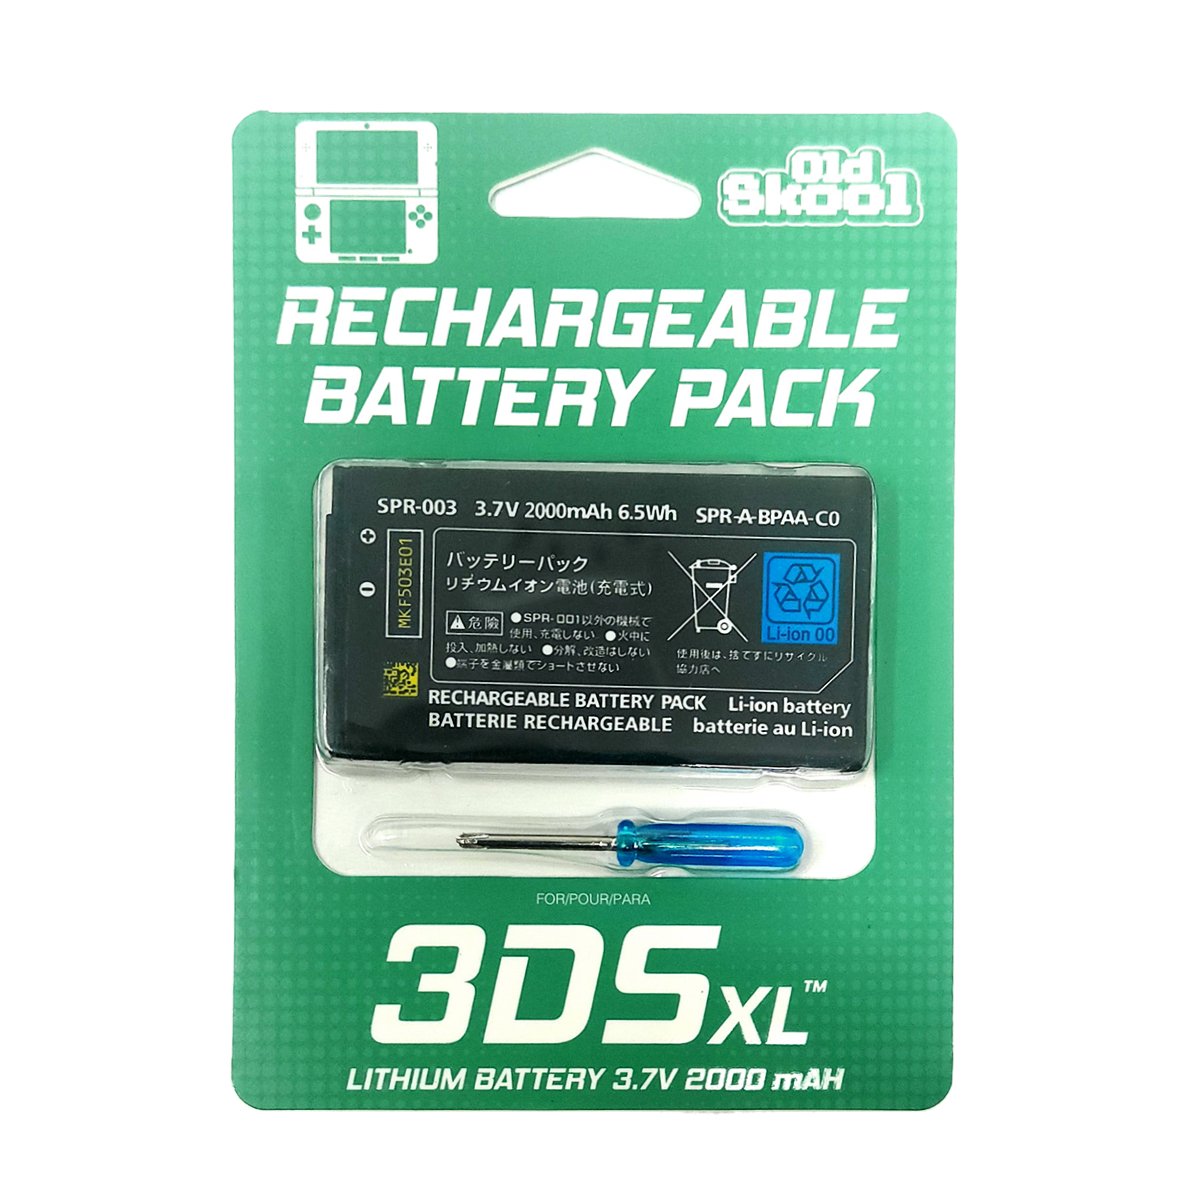 Rechargeable Battery Pack for Nintendo 3DS XL - Old Skool - Retro Island Gaming